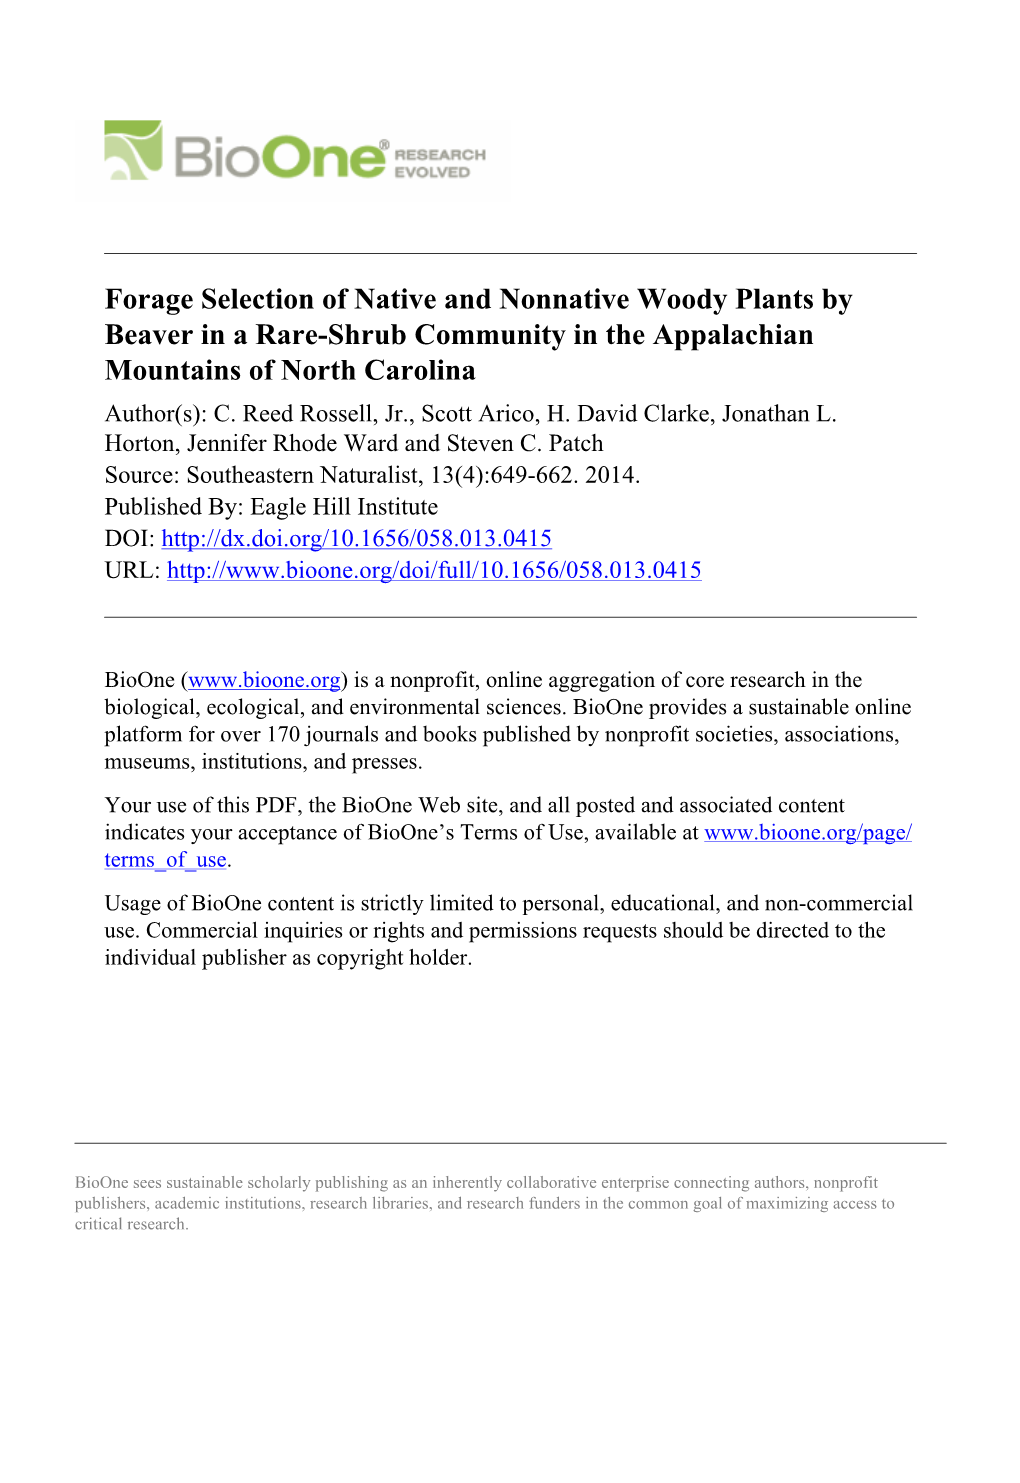 Forage Selection of Native and Nonnative Woody Plants by Beaver in a Rare-Shrub Community in the Appalachian Mountains of North Carolina Author(S): C